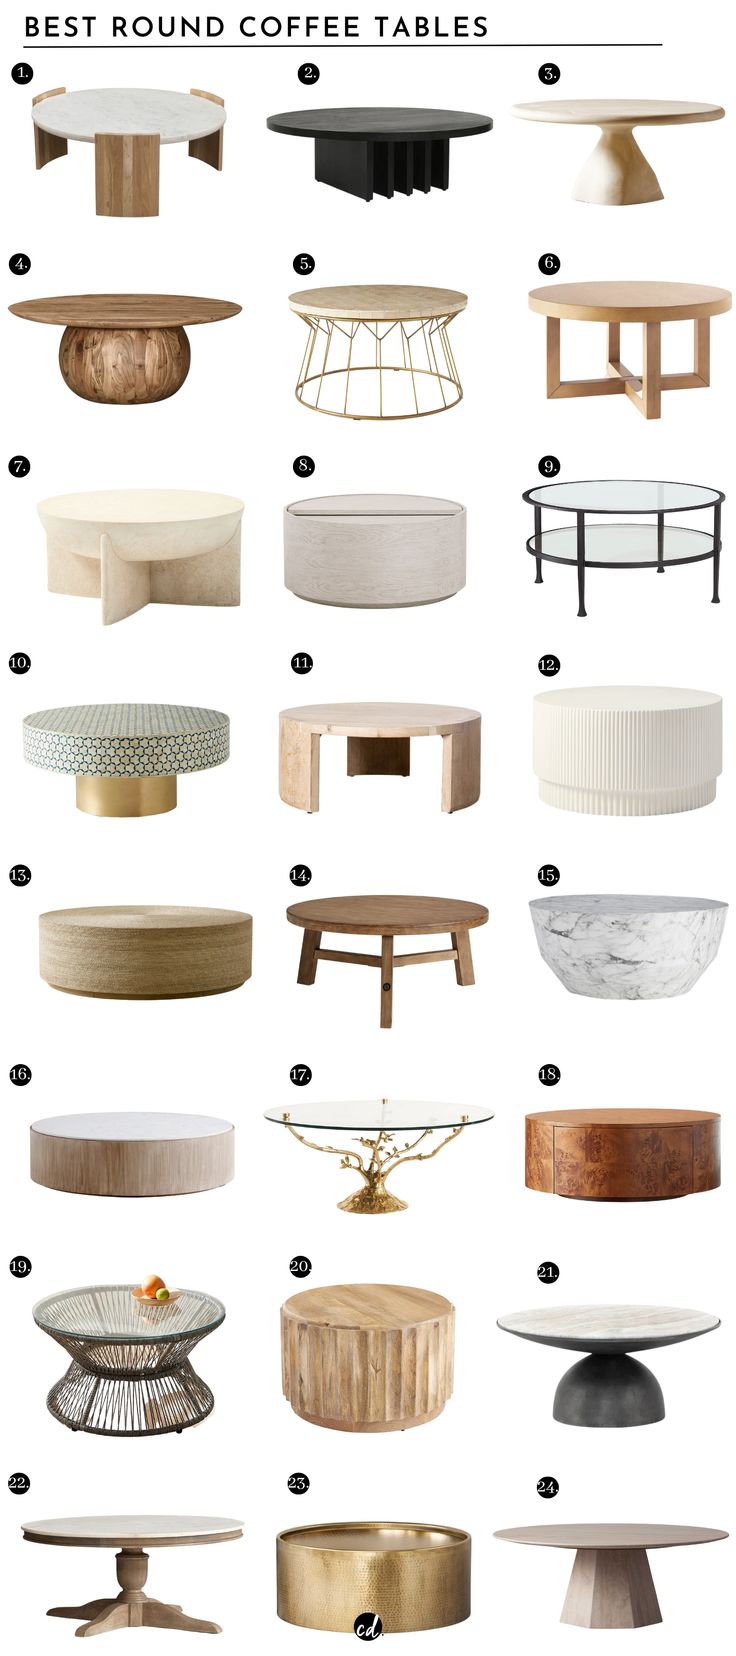 Best Round Coffee Tables Decoration, Outdoor, Round Coffee Table Living Room, Round Coffee Table Modern, Round Coffee Table Styling, Round Coffee Table Sets, Round Coffee Table Decor, Round Coffee Table, Round Coffee Tables